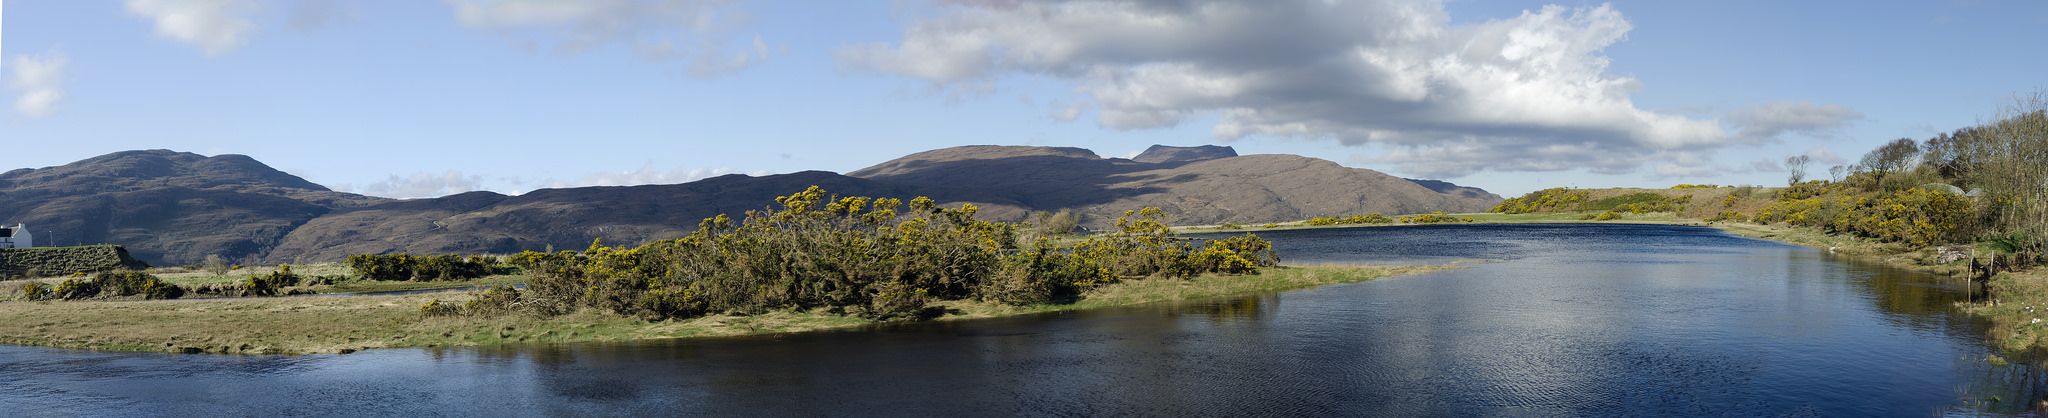 Ullapool River Book 4 Chapter 1: From Allapur to Ullapool